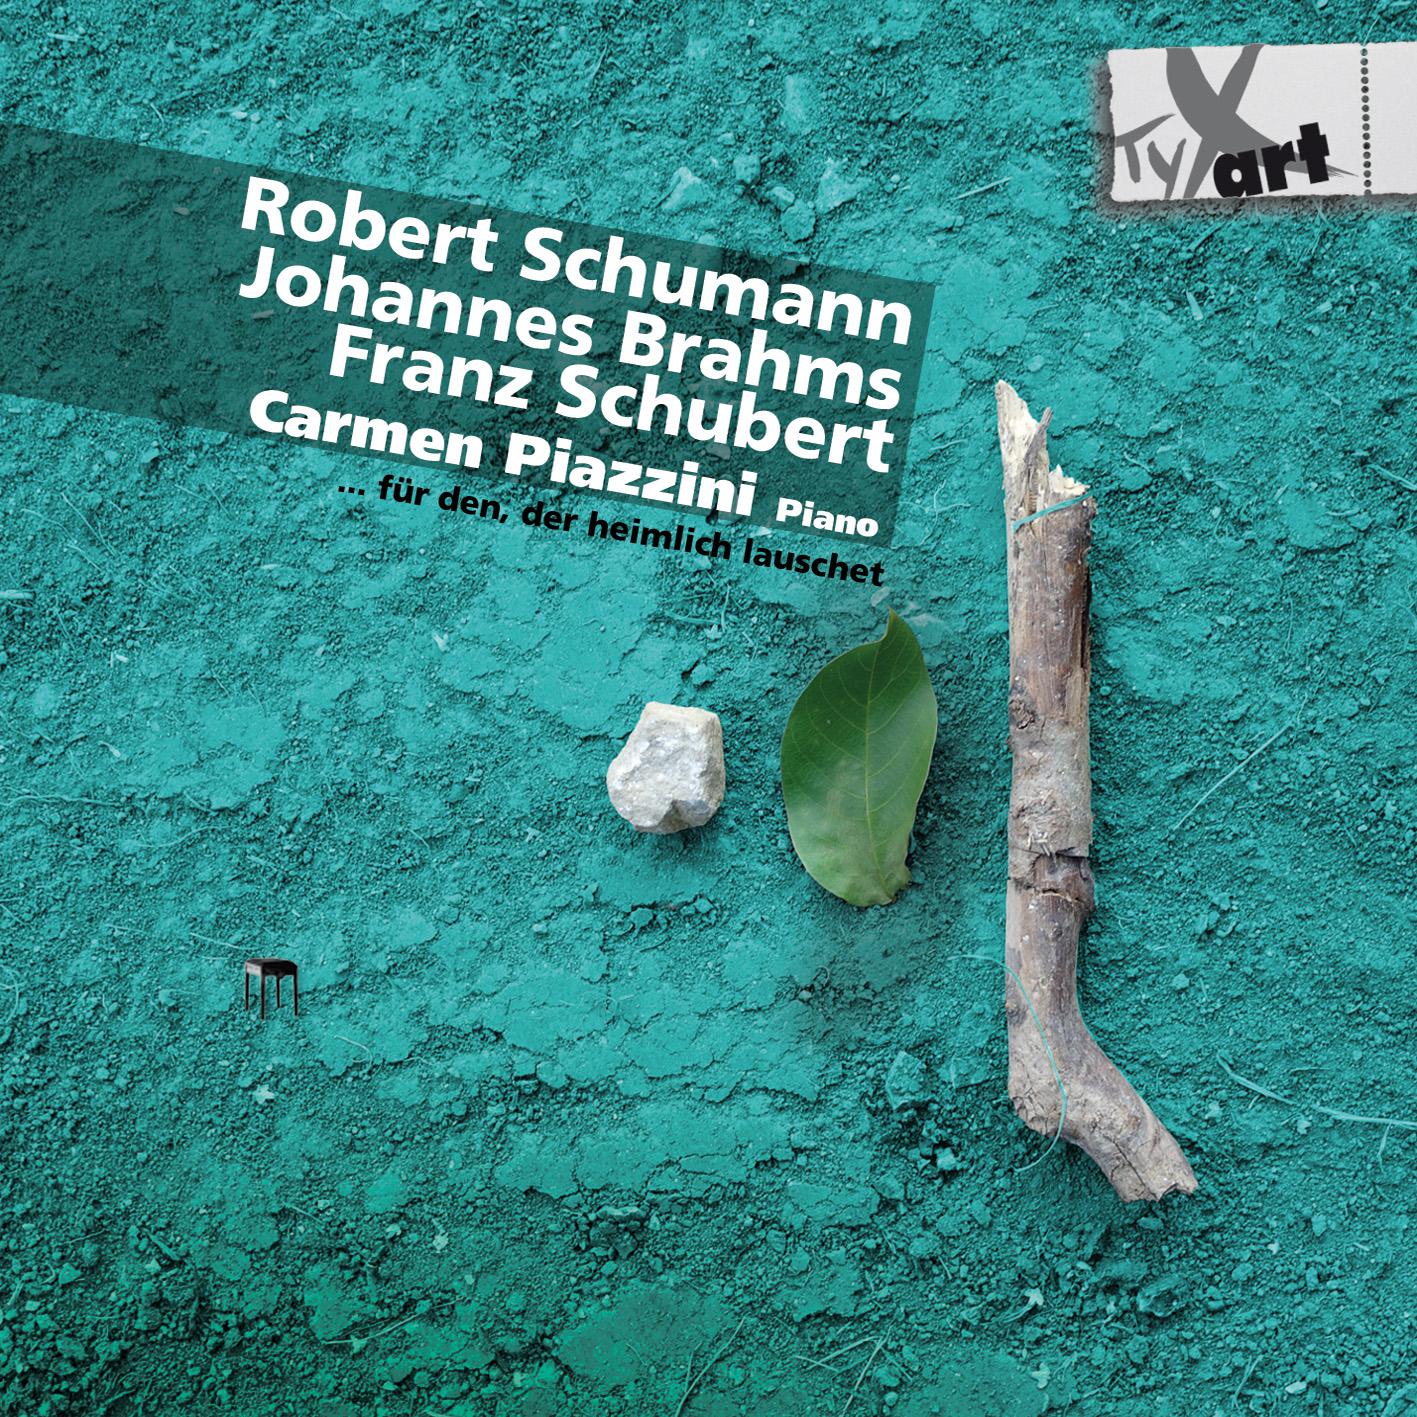 16 Variations on a Theme by R. Schumann, Op. 9: 16 Variations in F-Sharp Minor on a Theme by R. Schumann, Op. 9